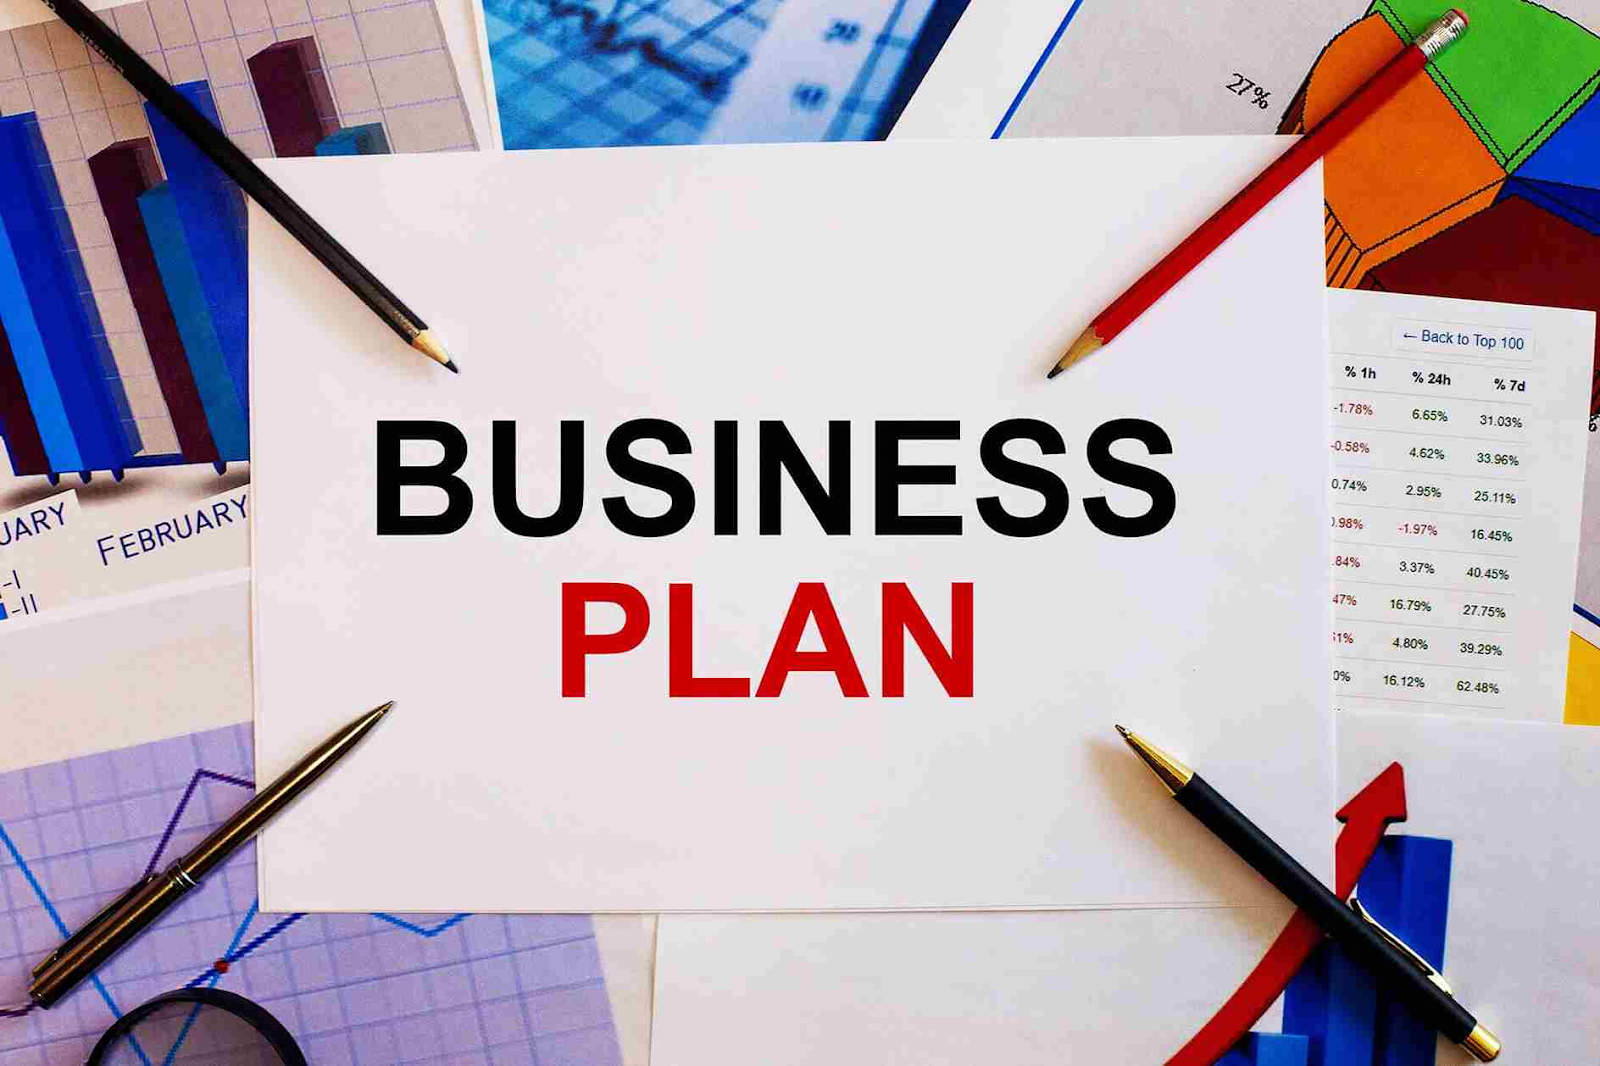 small stationery business plan